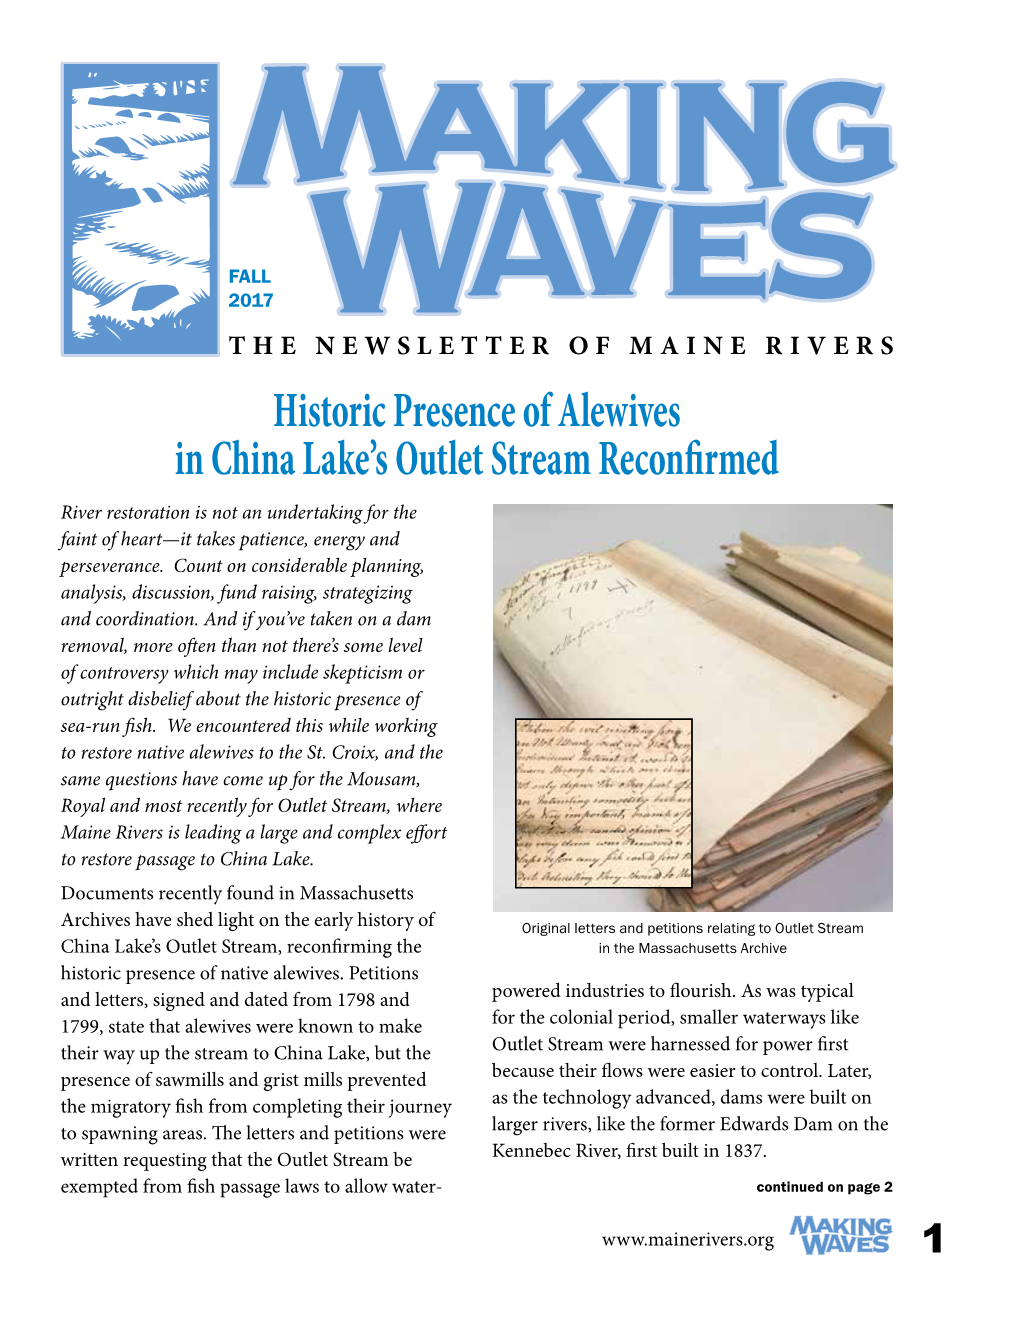 Historic Presence of Alewives in China Lake's Outlet